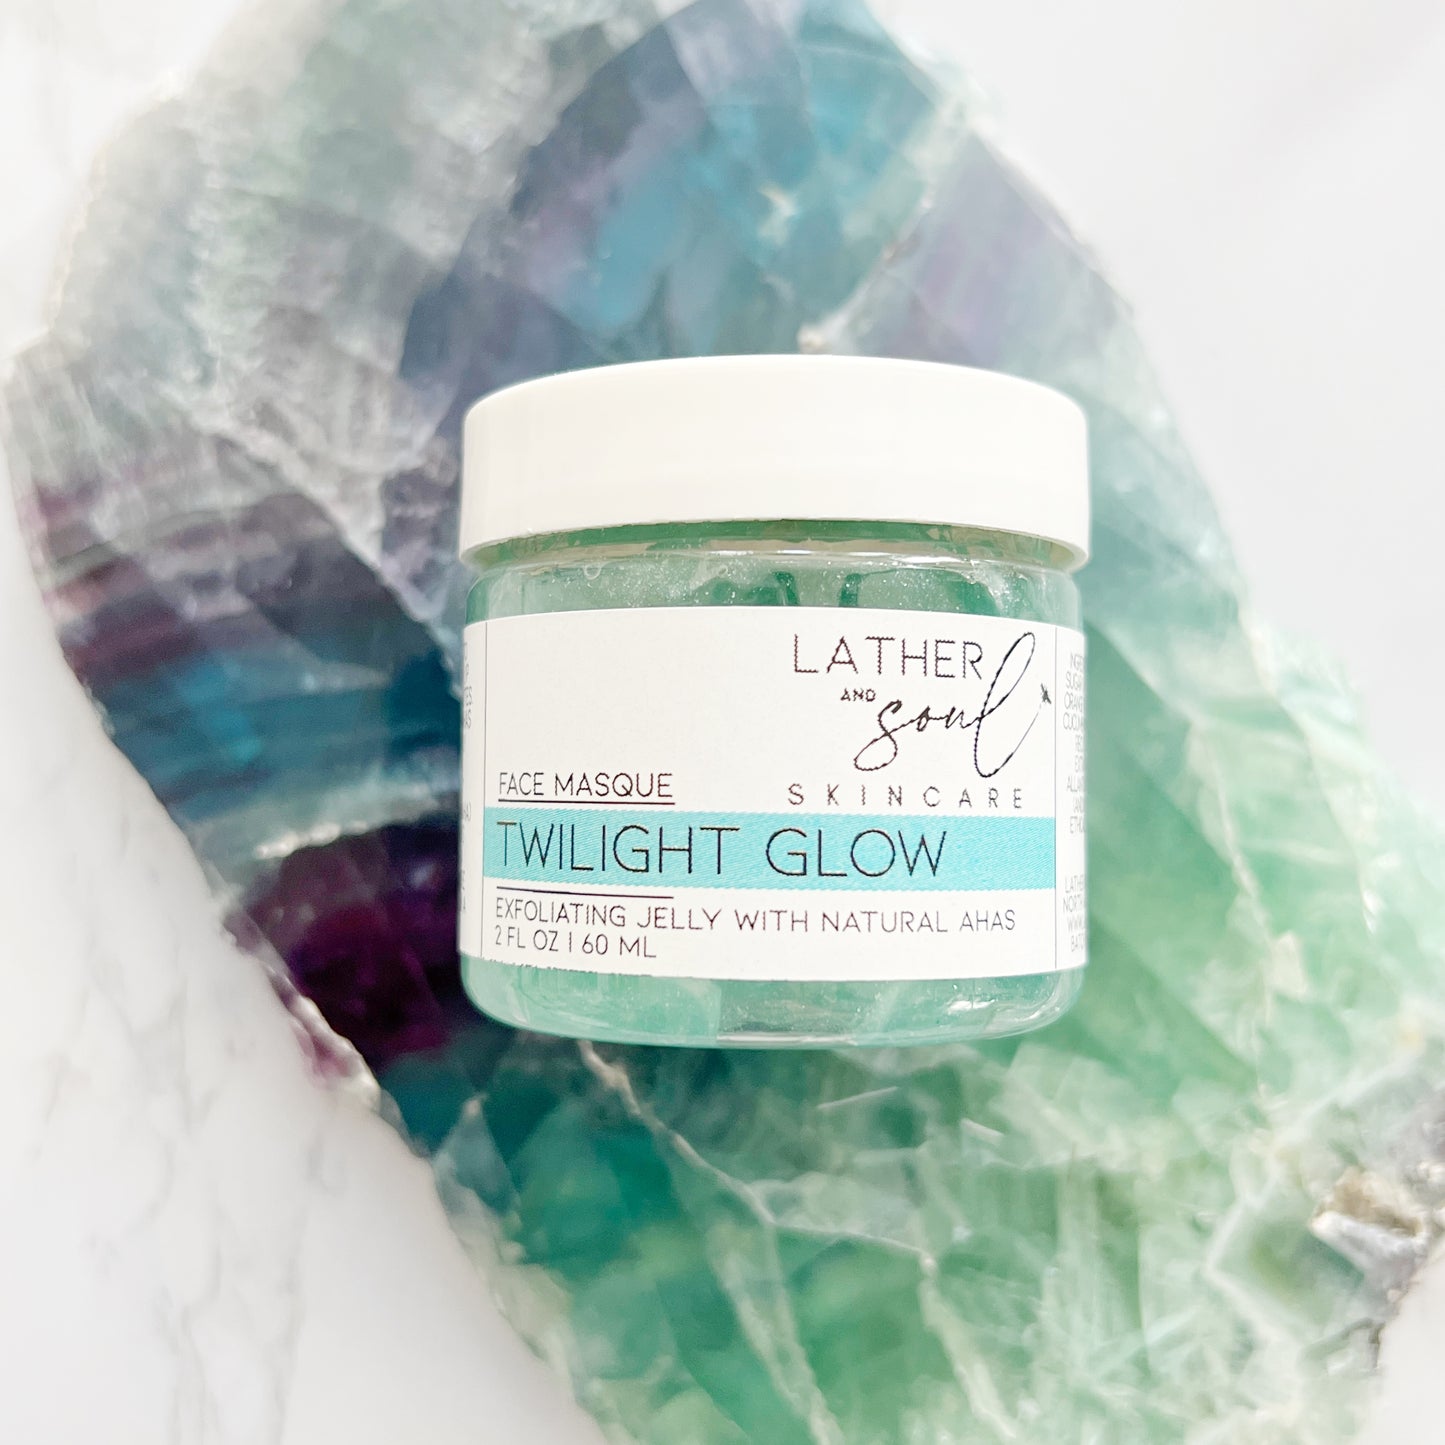 Twilight Glow jelly masque with natural AHAs for exfoliating the skin